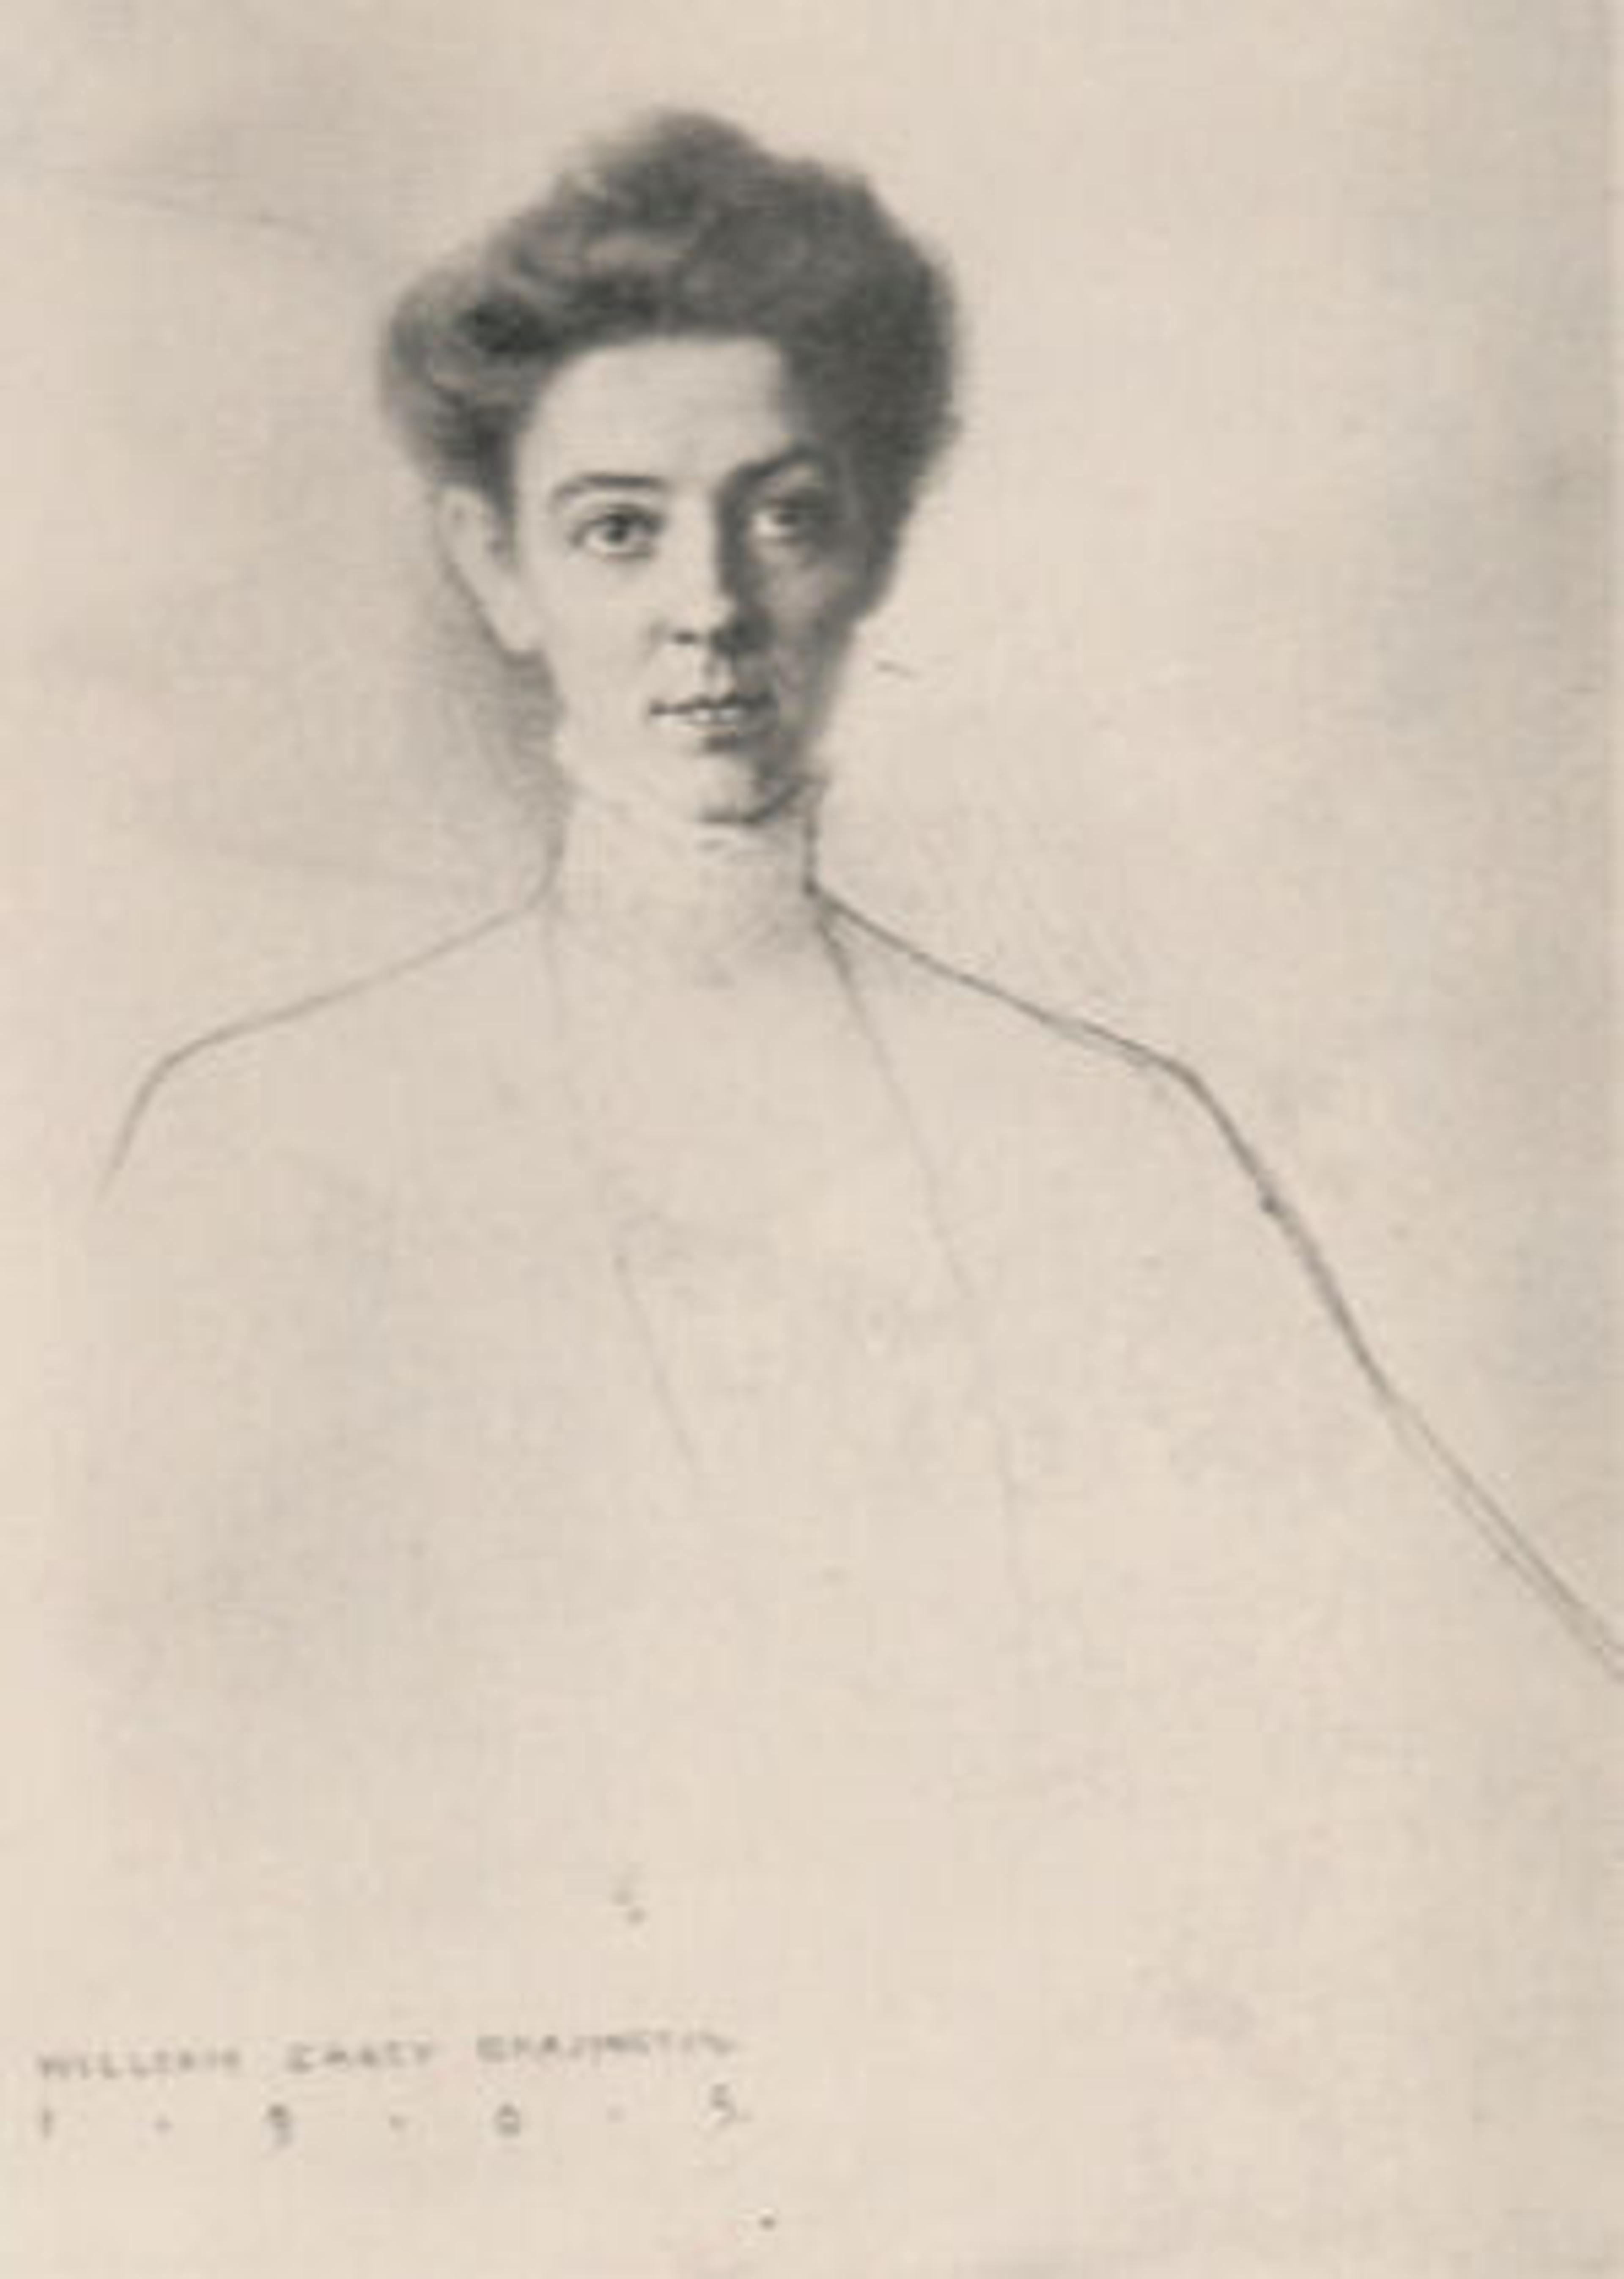 Frances Morris in 1905, photograph of a lost drawing by William Carey Brazington